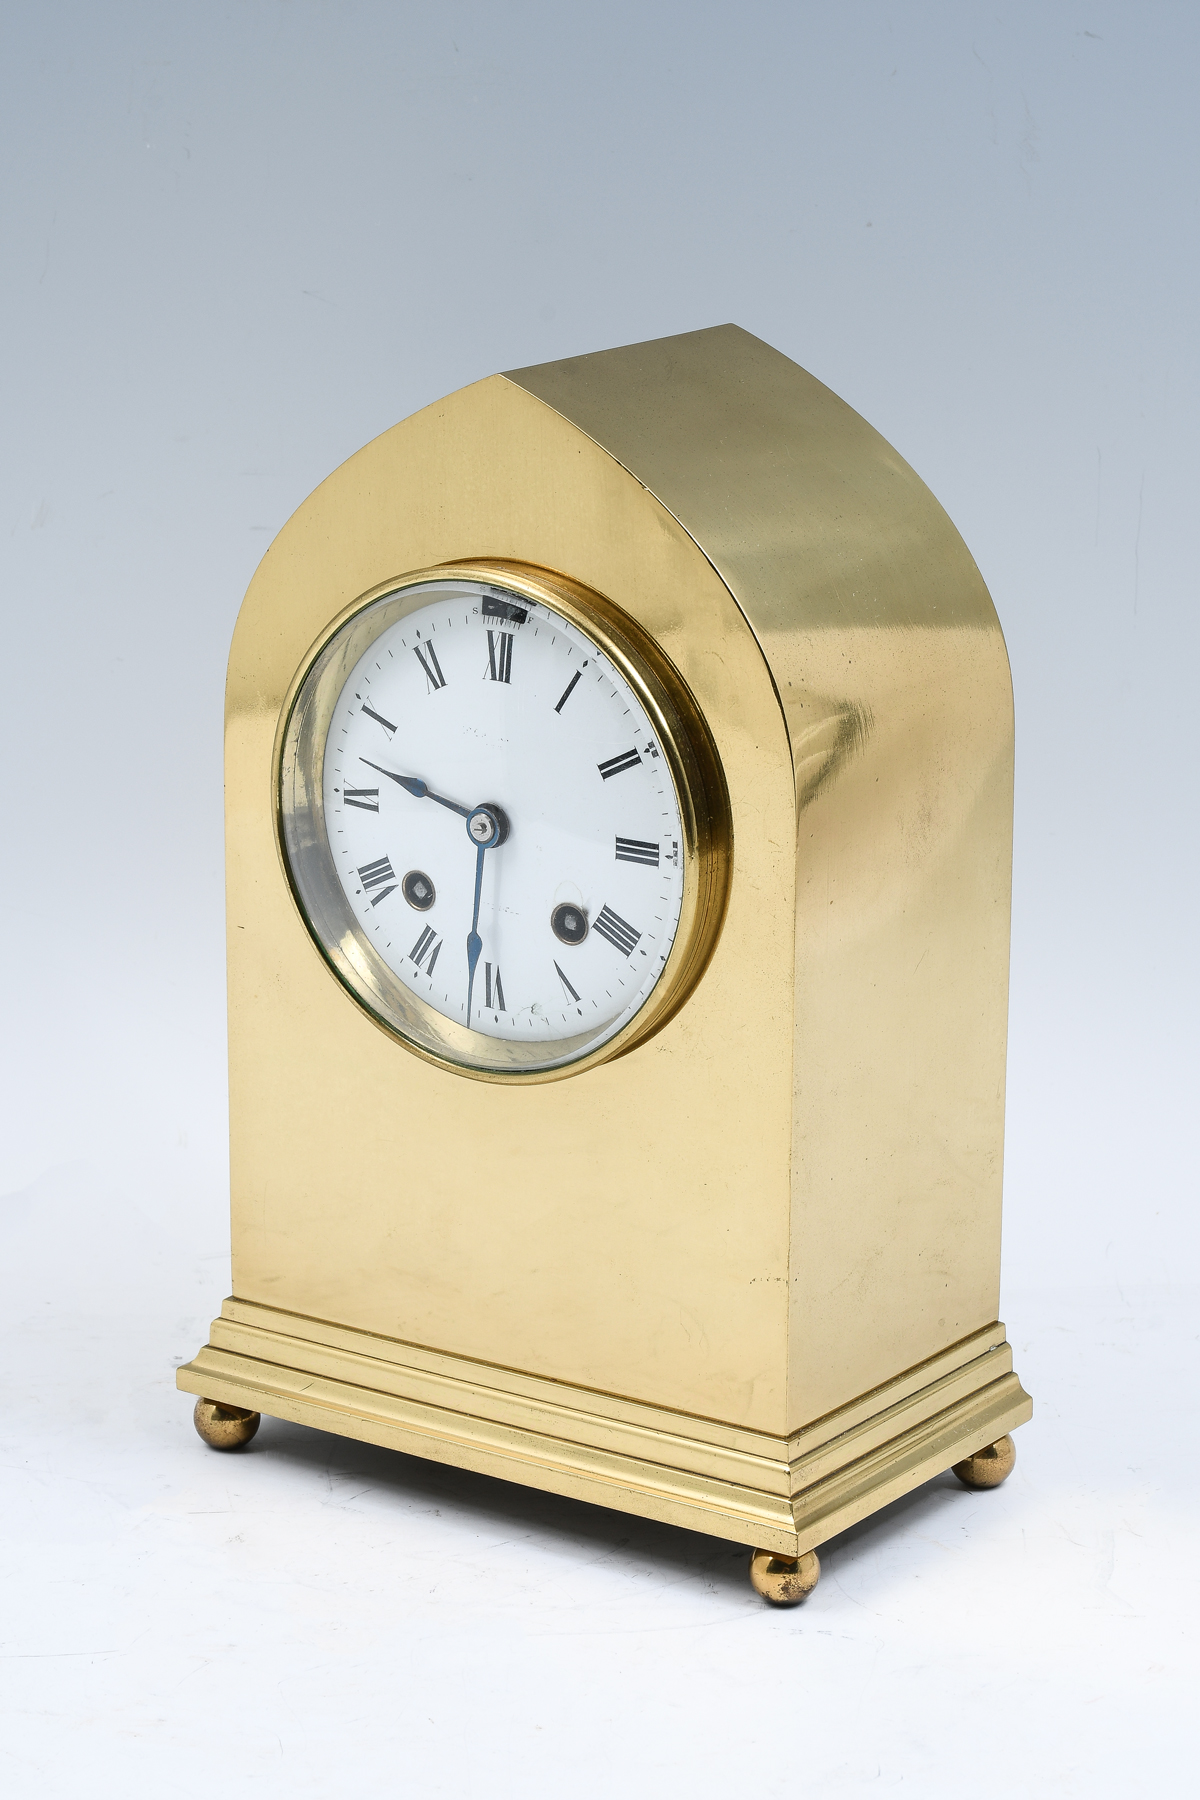 CHELSEA BRASS GOTHIC CLOCK: A mid